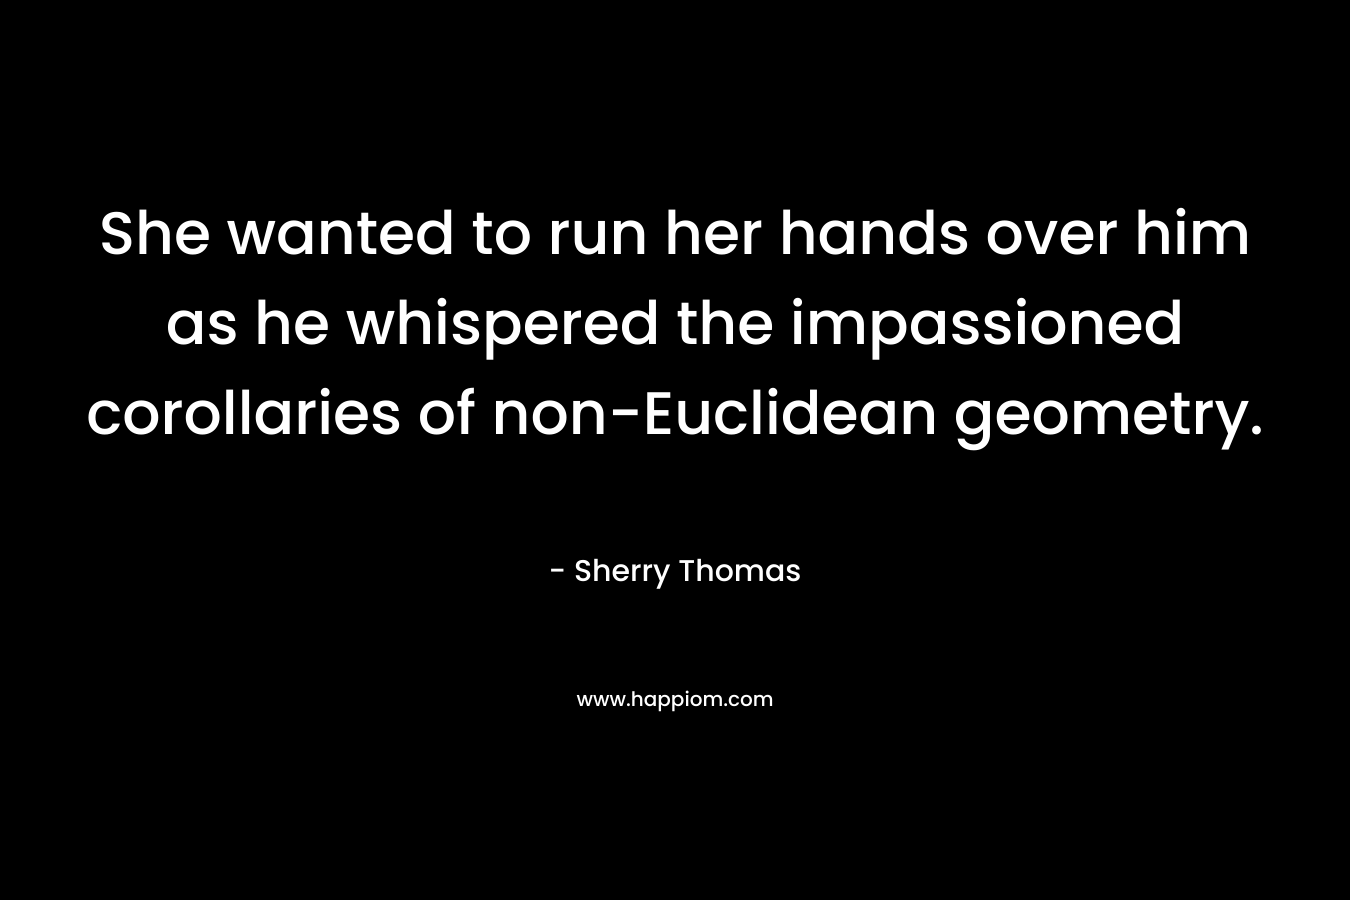 She wanted to run her hands over him as he whispered the impassioned corollaries of non-Euclidean geometry. – Sherry Thomas